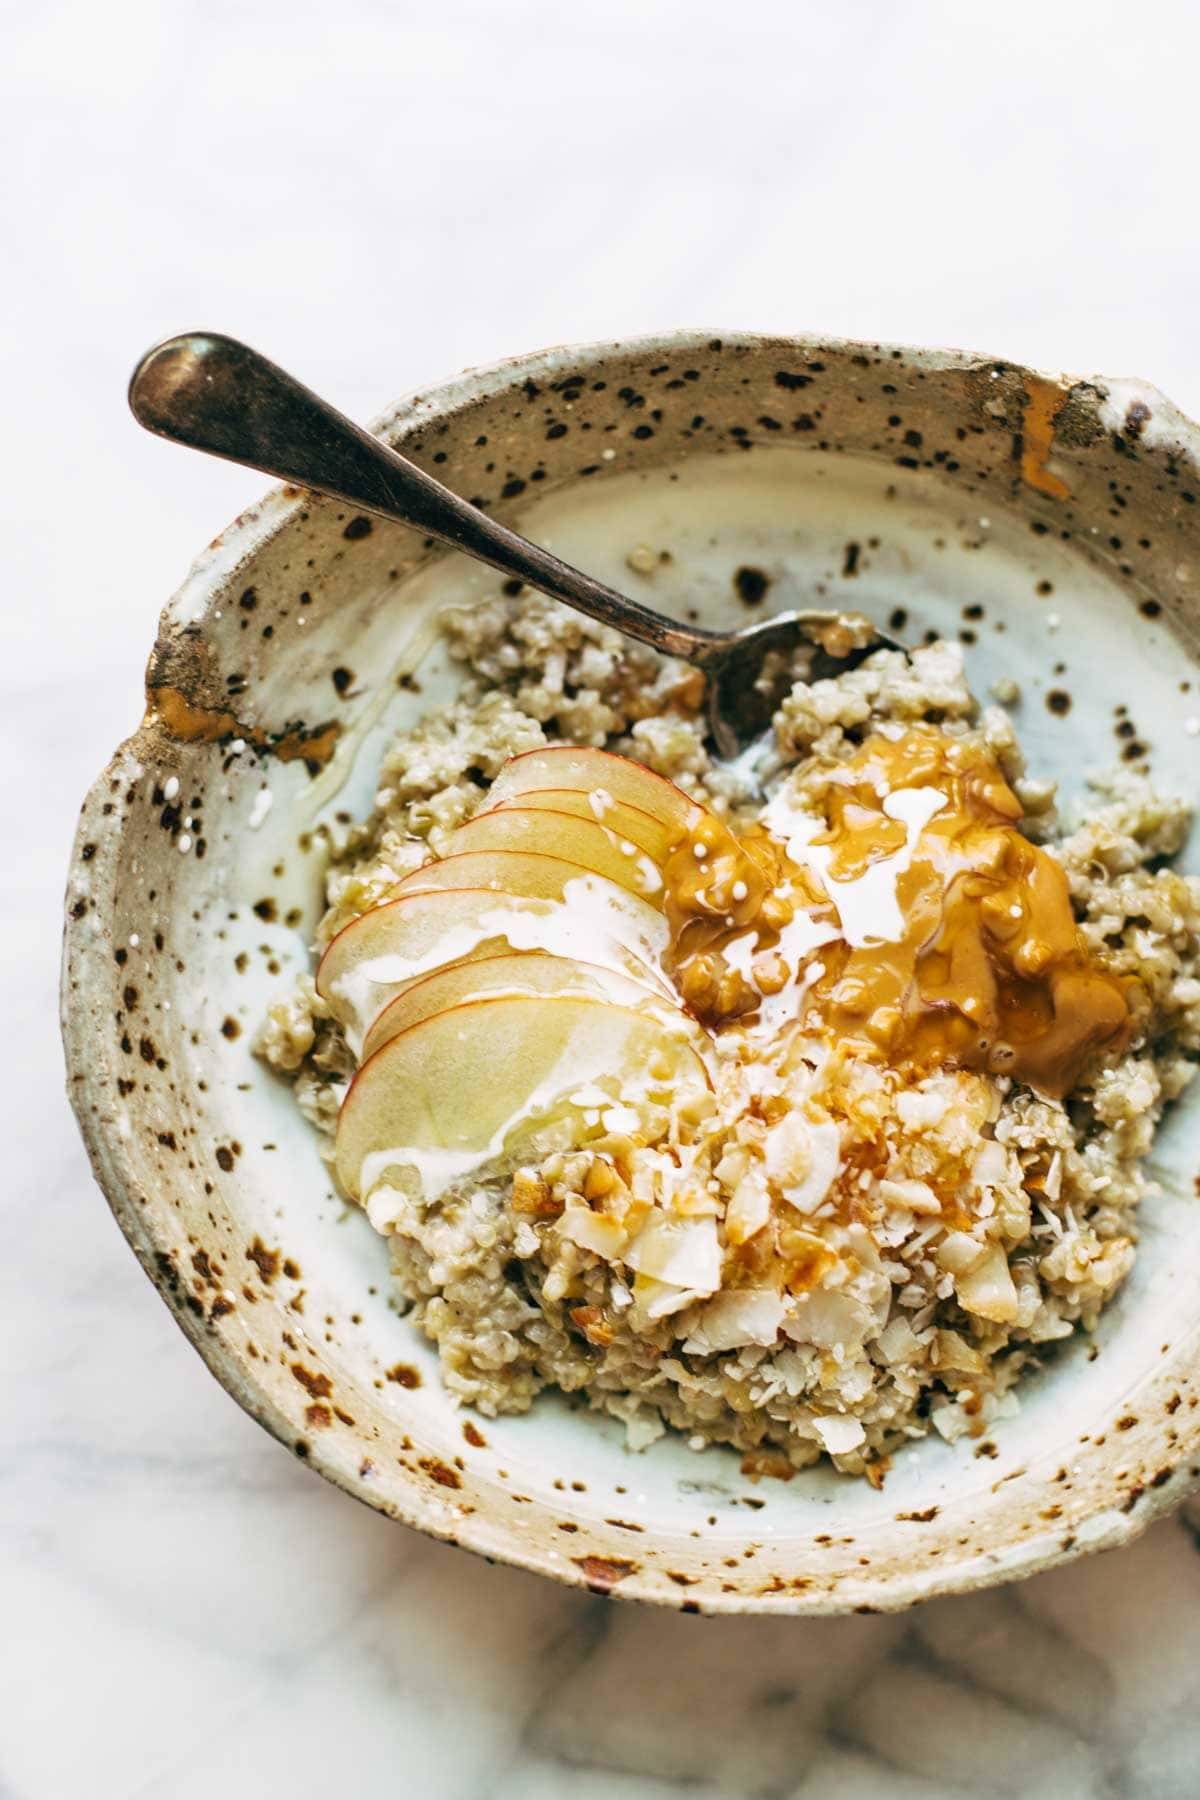 Simple Coconut Breakfast Porridge - a wholesome and cozy breakfast recipe with quinoa, oats, coconut milk, and one surprise ingredient! | pinchofyum.com